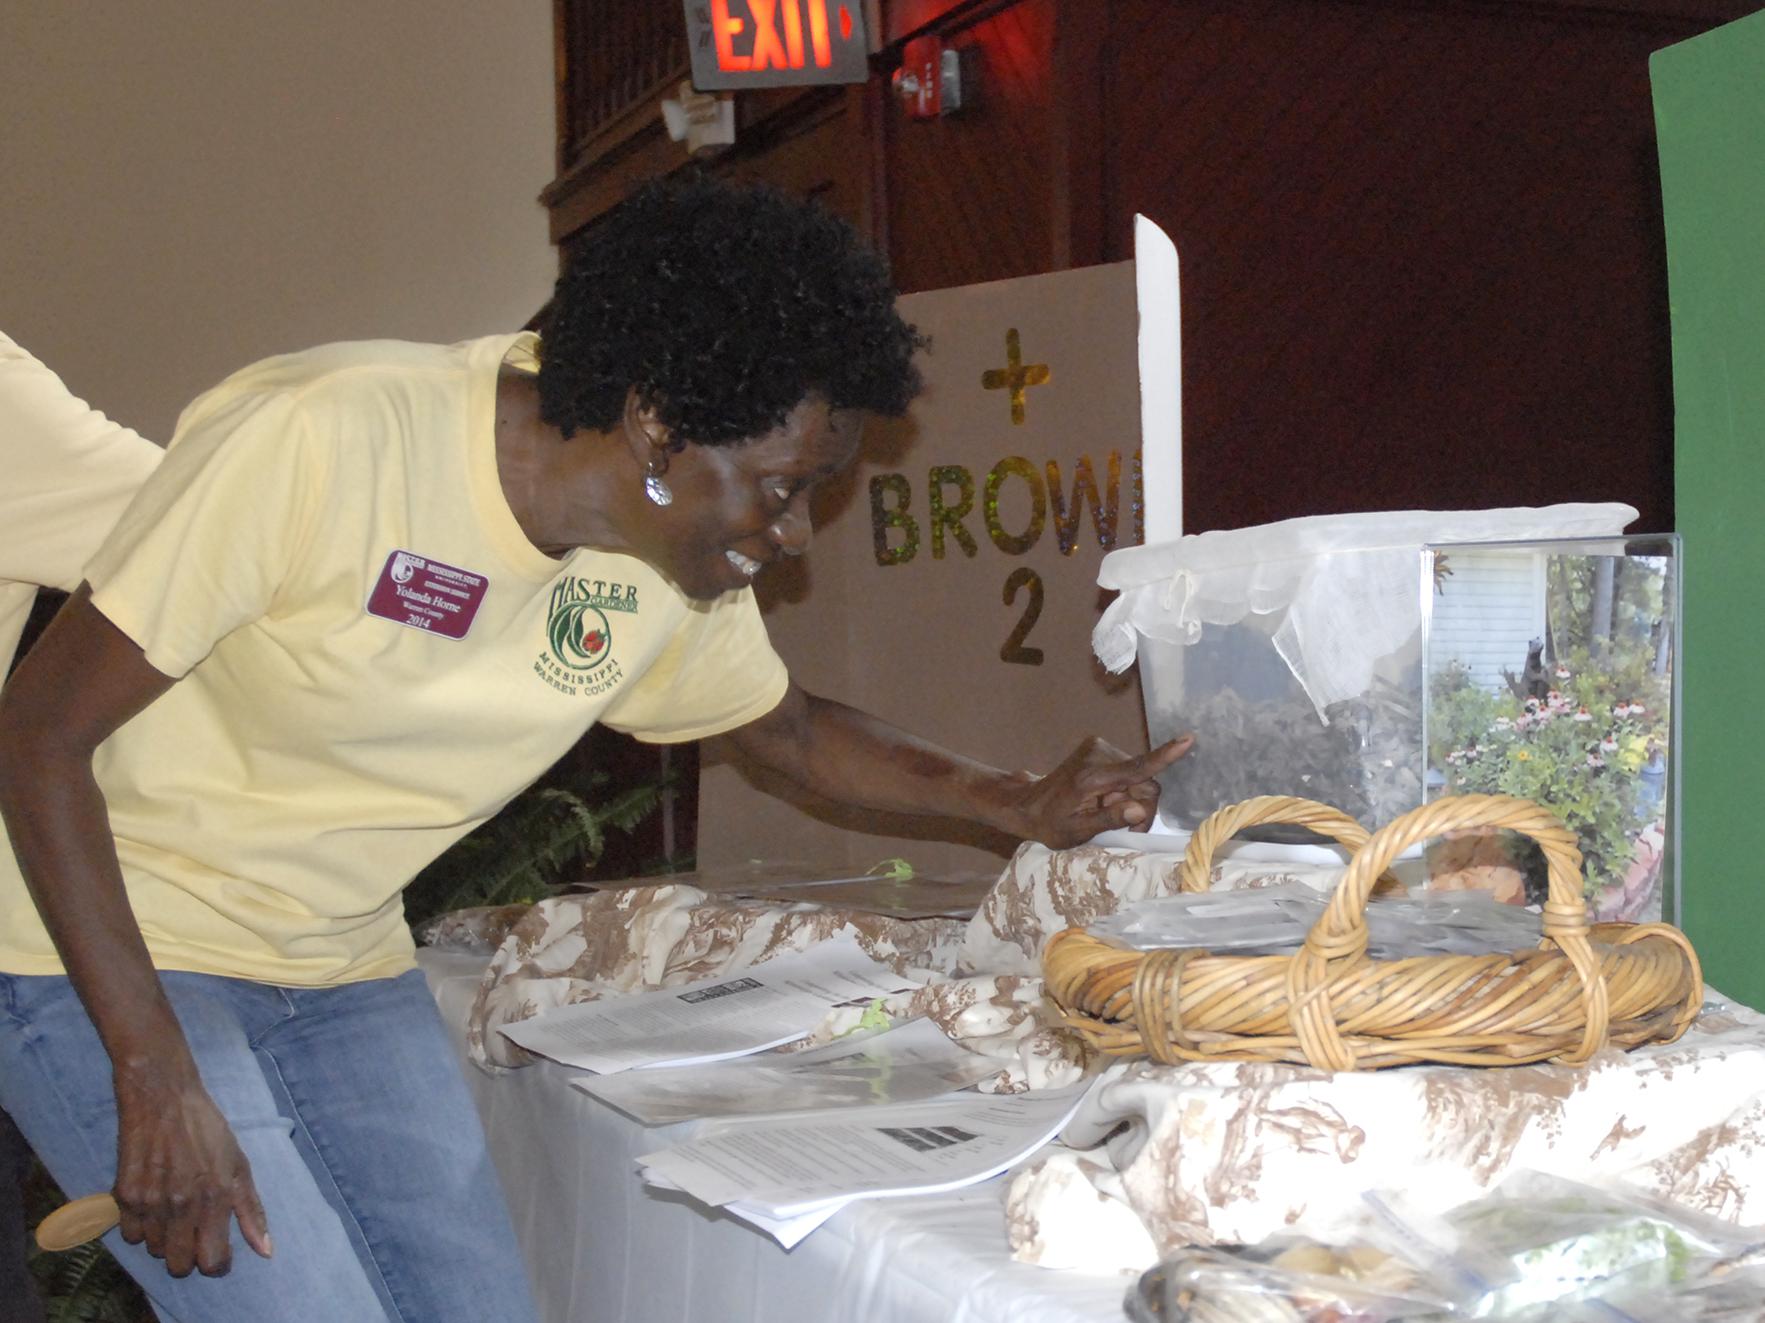 Warren County Master Gardener Yolanda Horne checks on worms living in a plastic bin on June 13, 2017. The worms were part of an exhibit on composting at the Know Your Roots: Grow Your Business workshop in Vicksburg, Mississippi. (Photo by MSU Extension Service/Bonnie Coblentz)